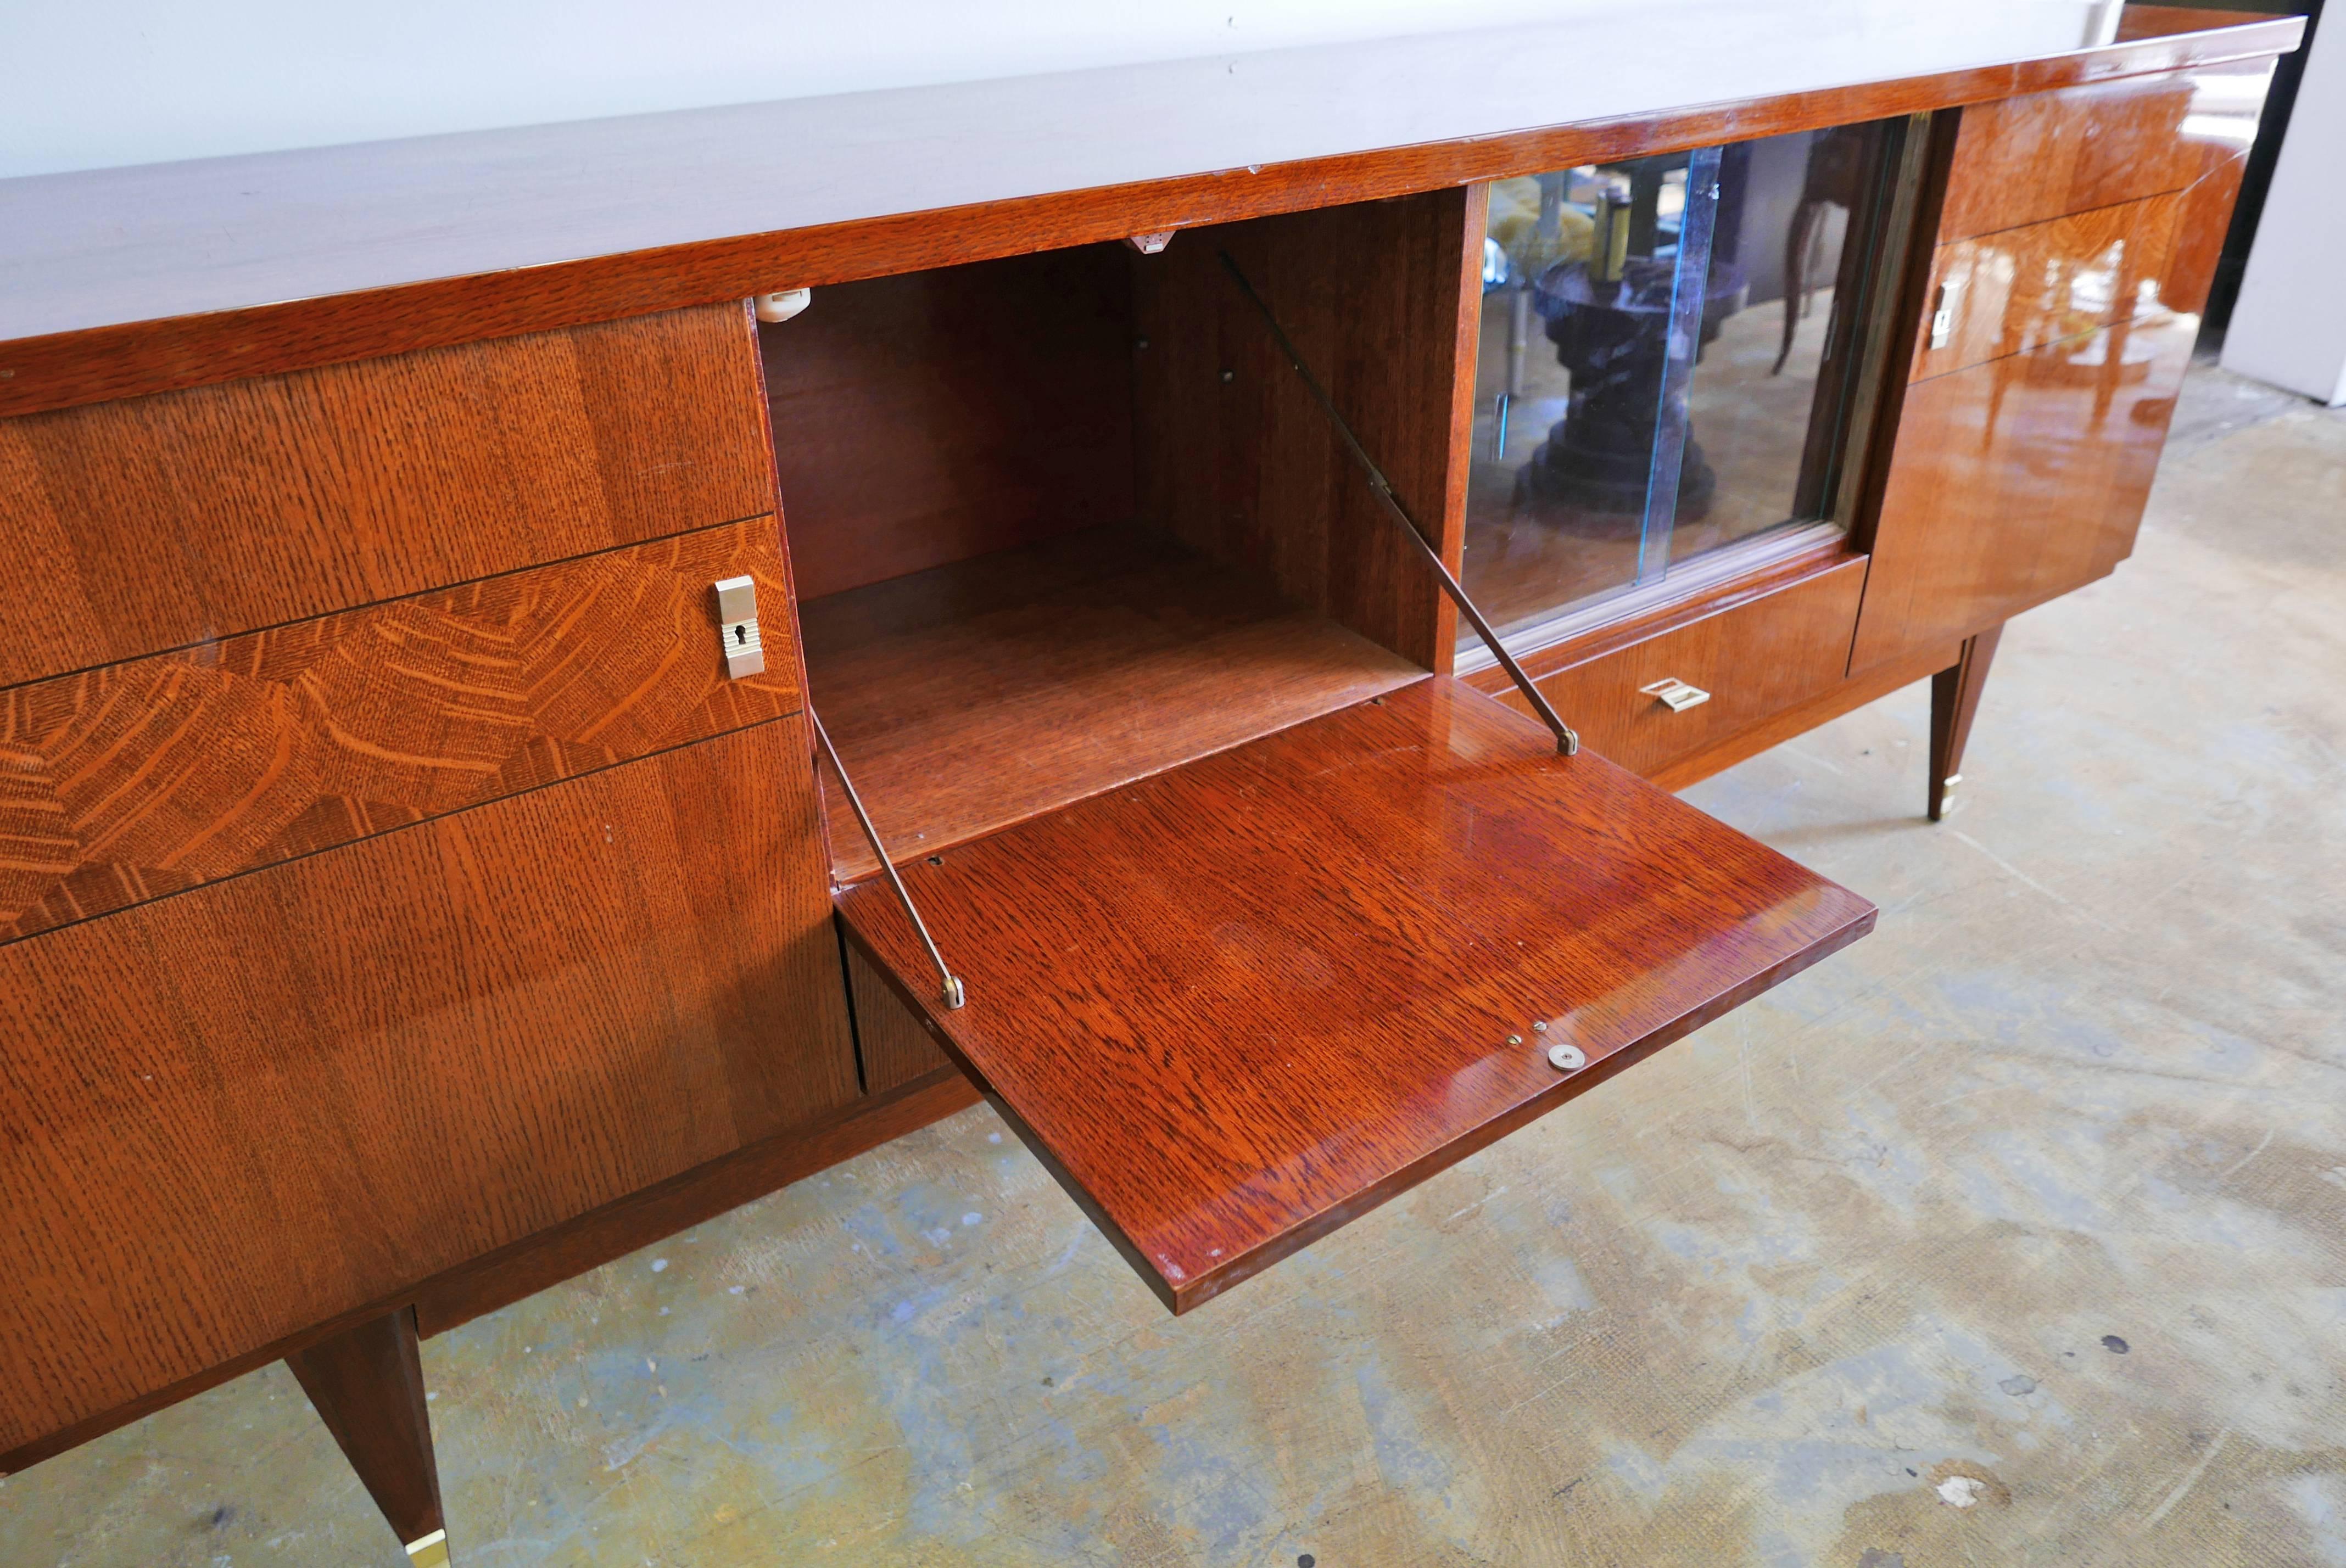 Mid-20th Century Credenza/Bar from France, 1930s Art Deco Period